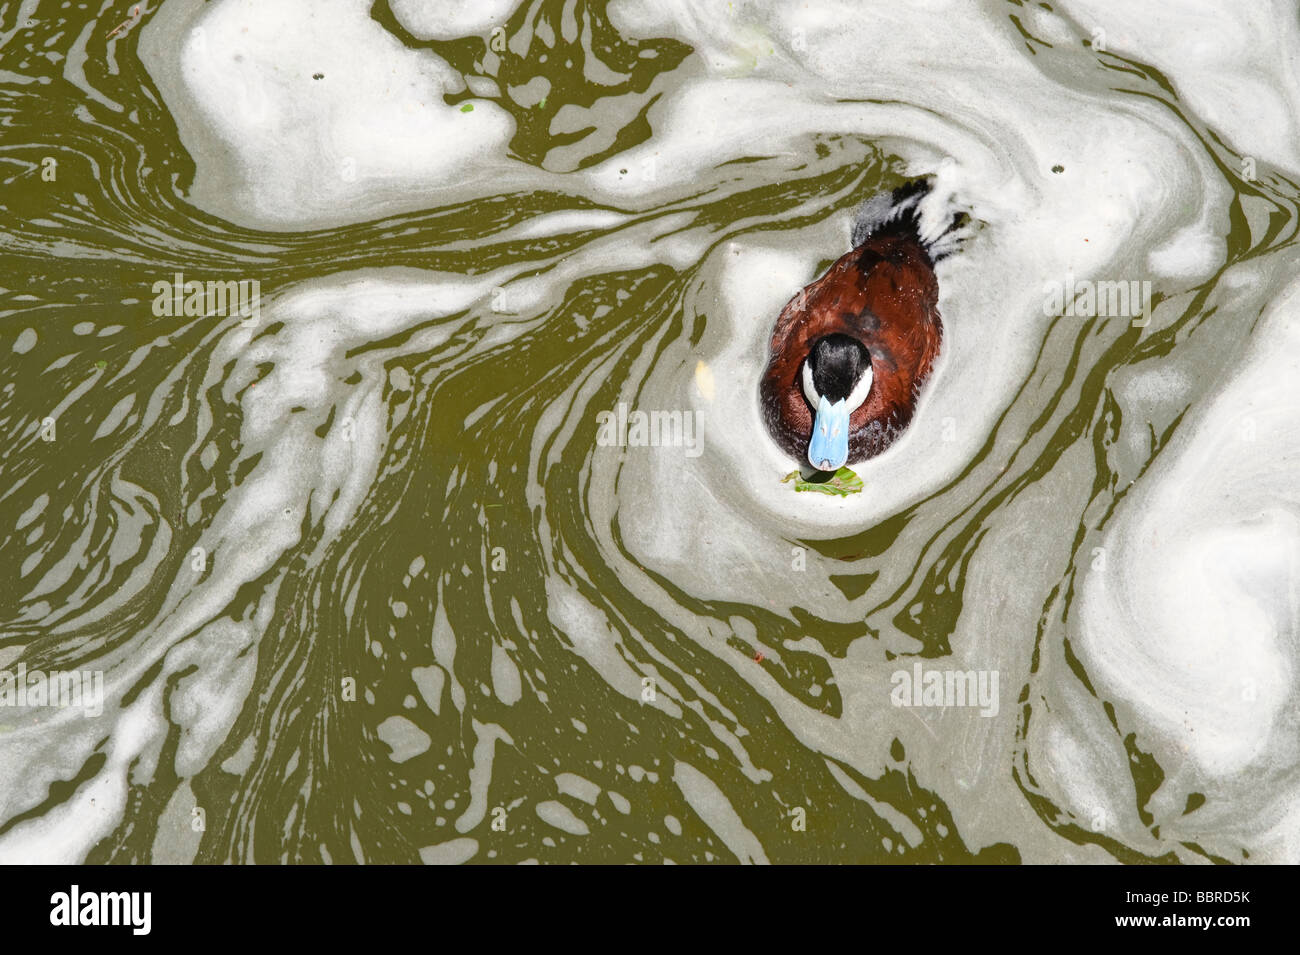 Male Ruddy duck in water with algae bloom at the Woodland Park Zoo Seattle Washington State USA Stock Photo